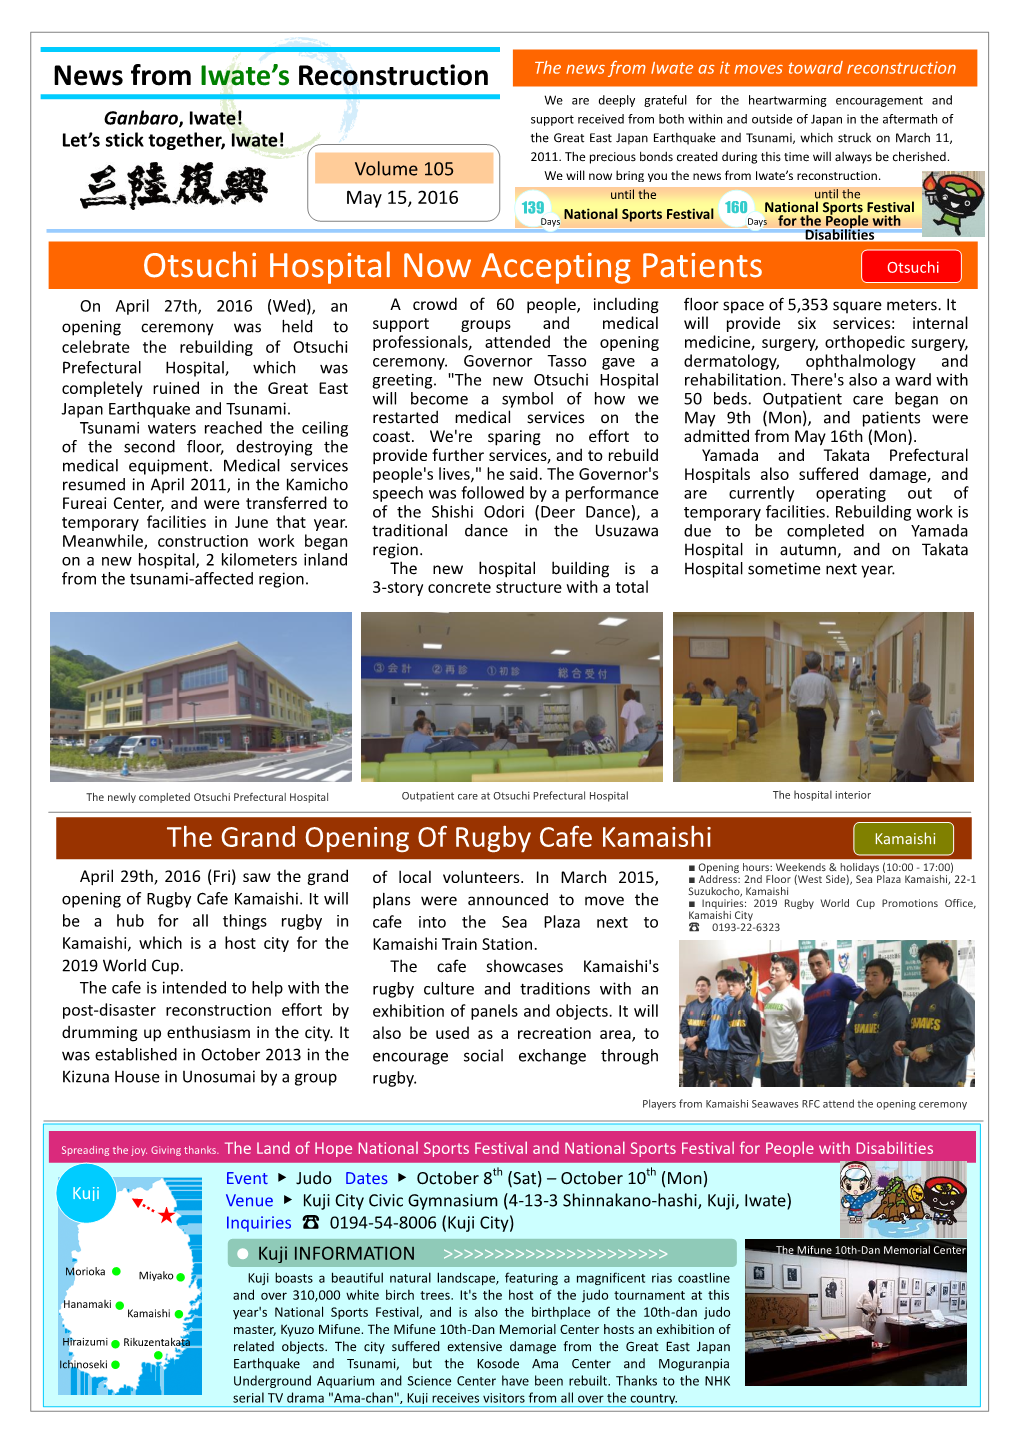 Otsuchi Hospital Now Accepting Patients Otsuchi on April 27Th, 2016 (Wed), an a Crowd of 60 People, Including Floor Space of 5,353 Square Meters